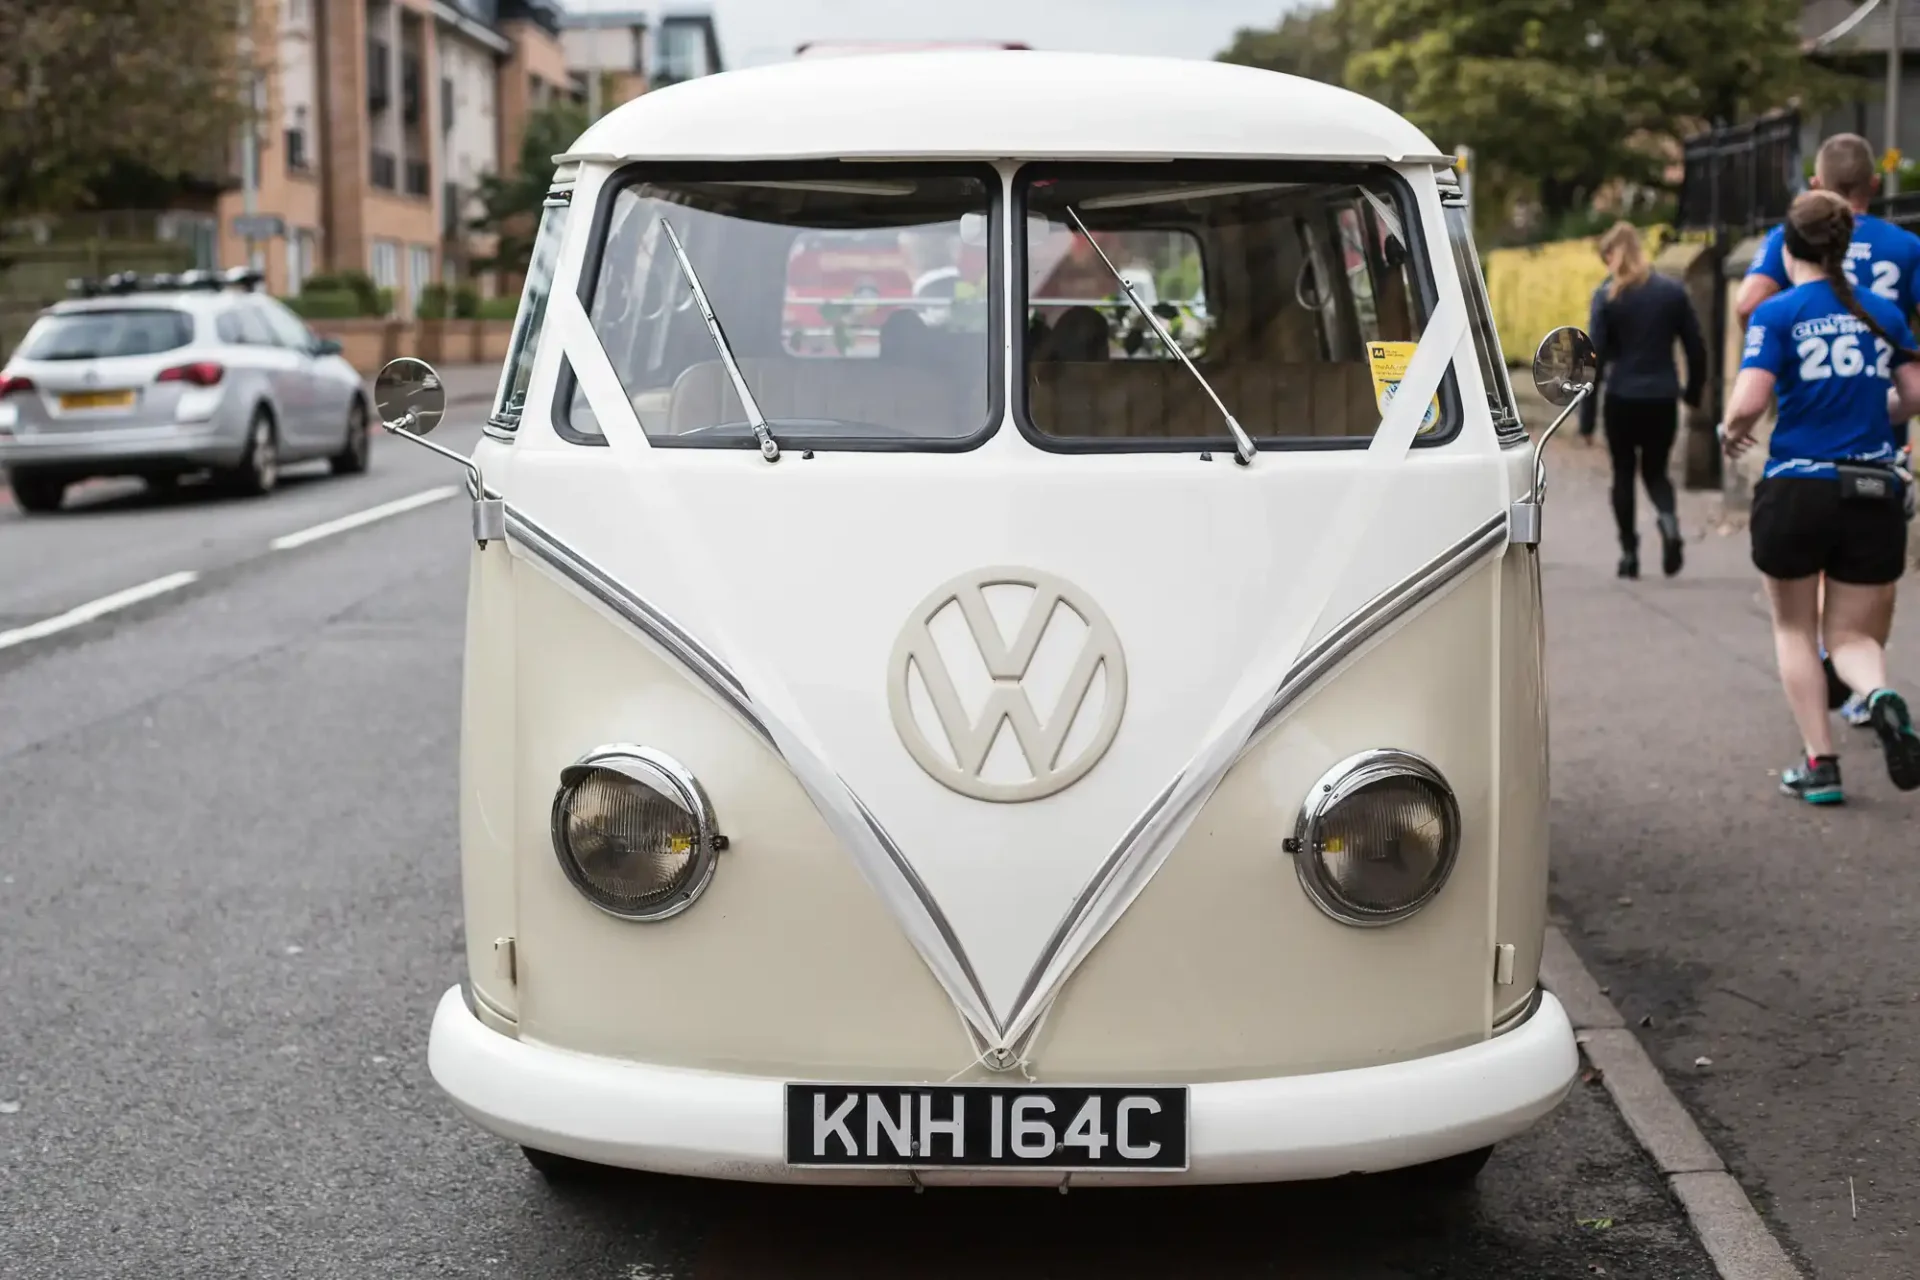 Front view of a vintage white volkswagen van with the logo visible on the front, parked on a street with pedestrians in the background.